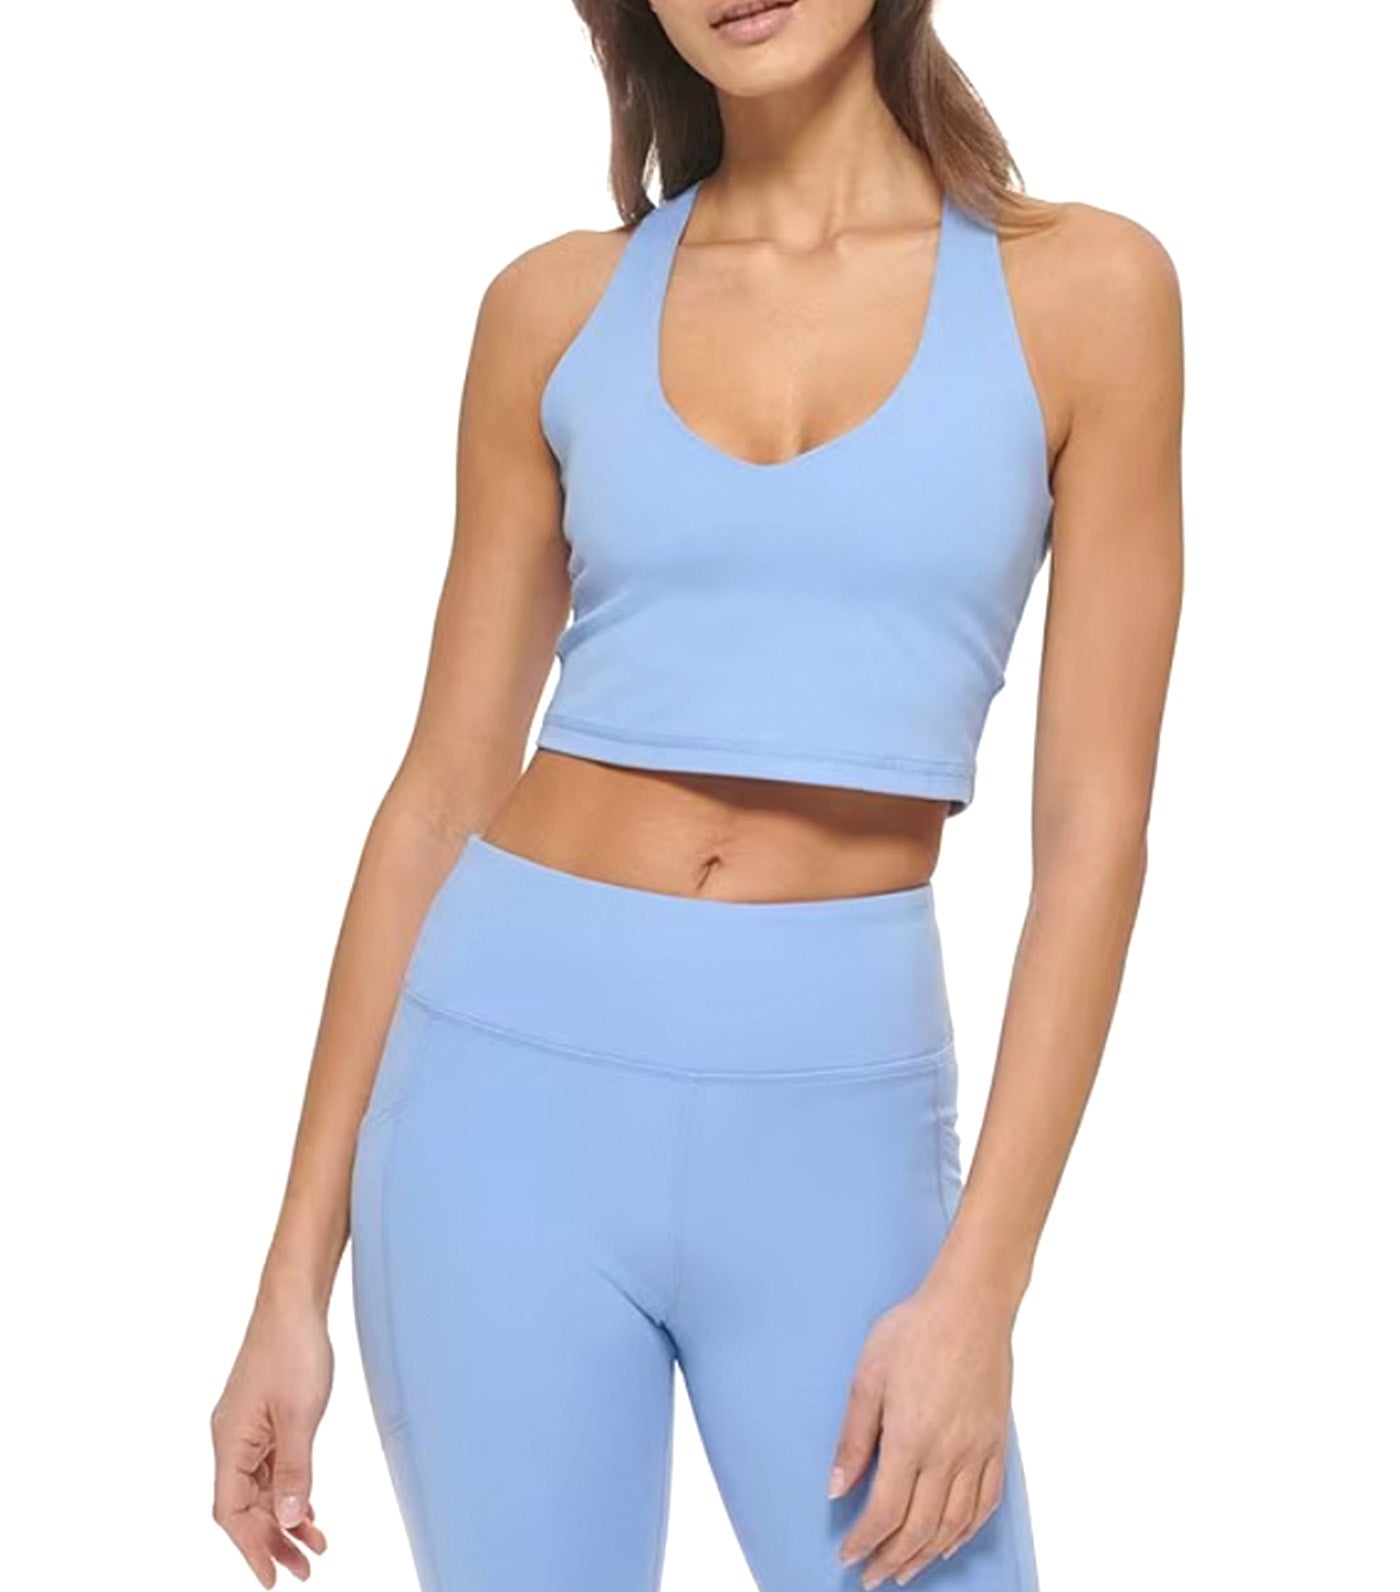 Dkny Sport Women's Balance Compression Cropped Tank Top